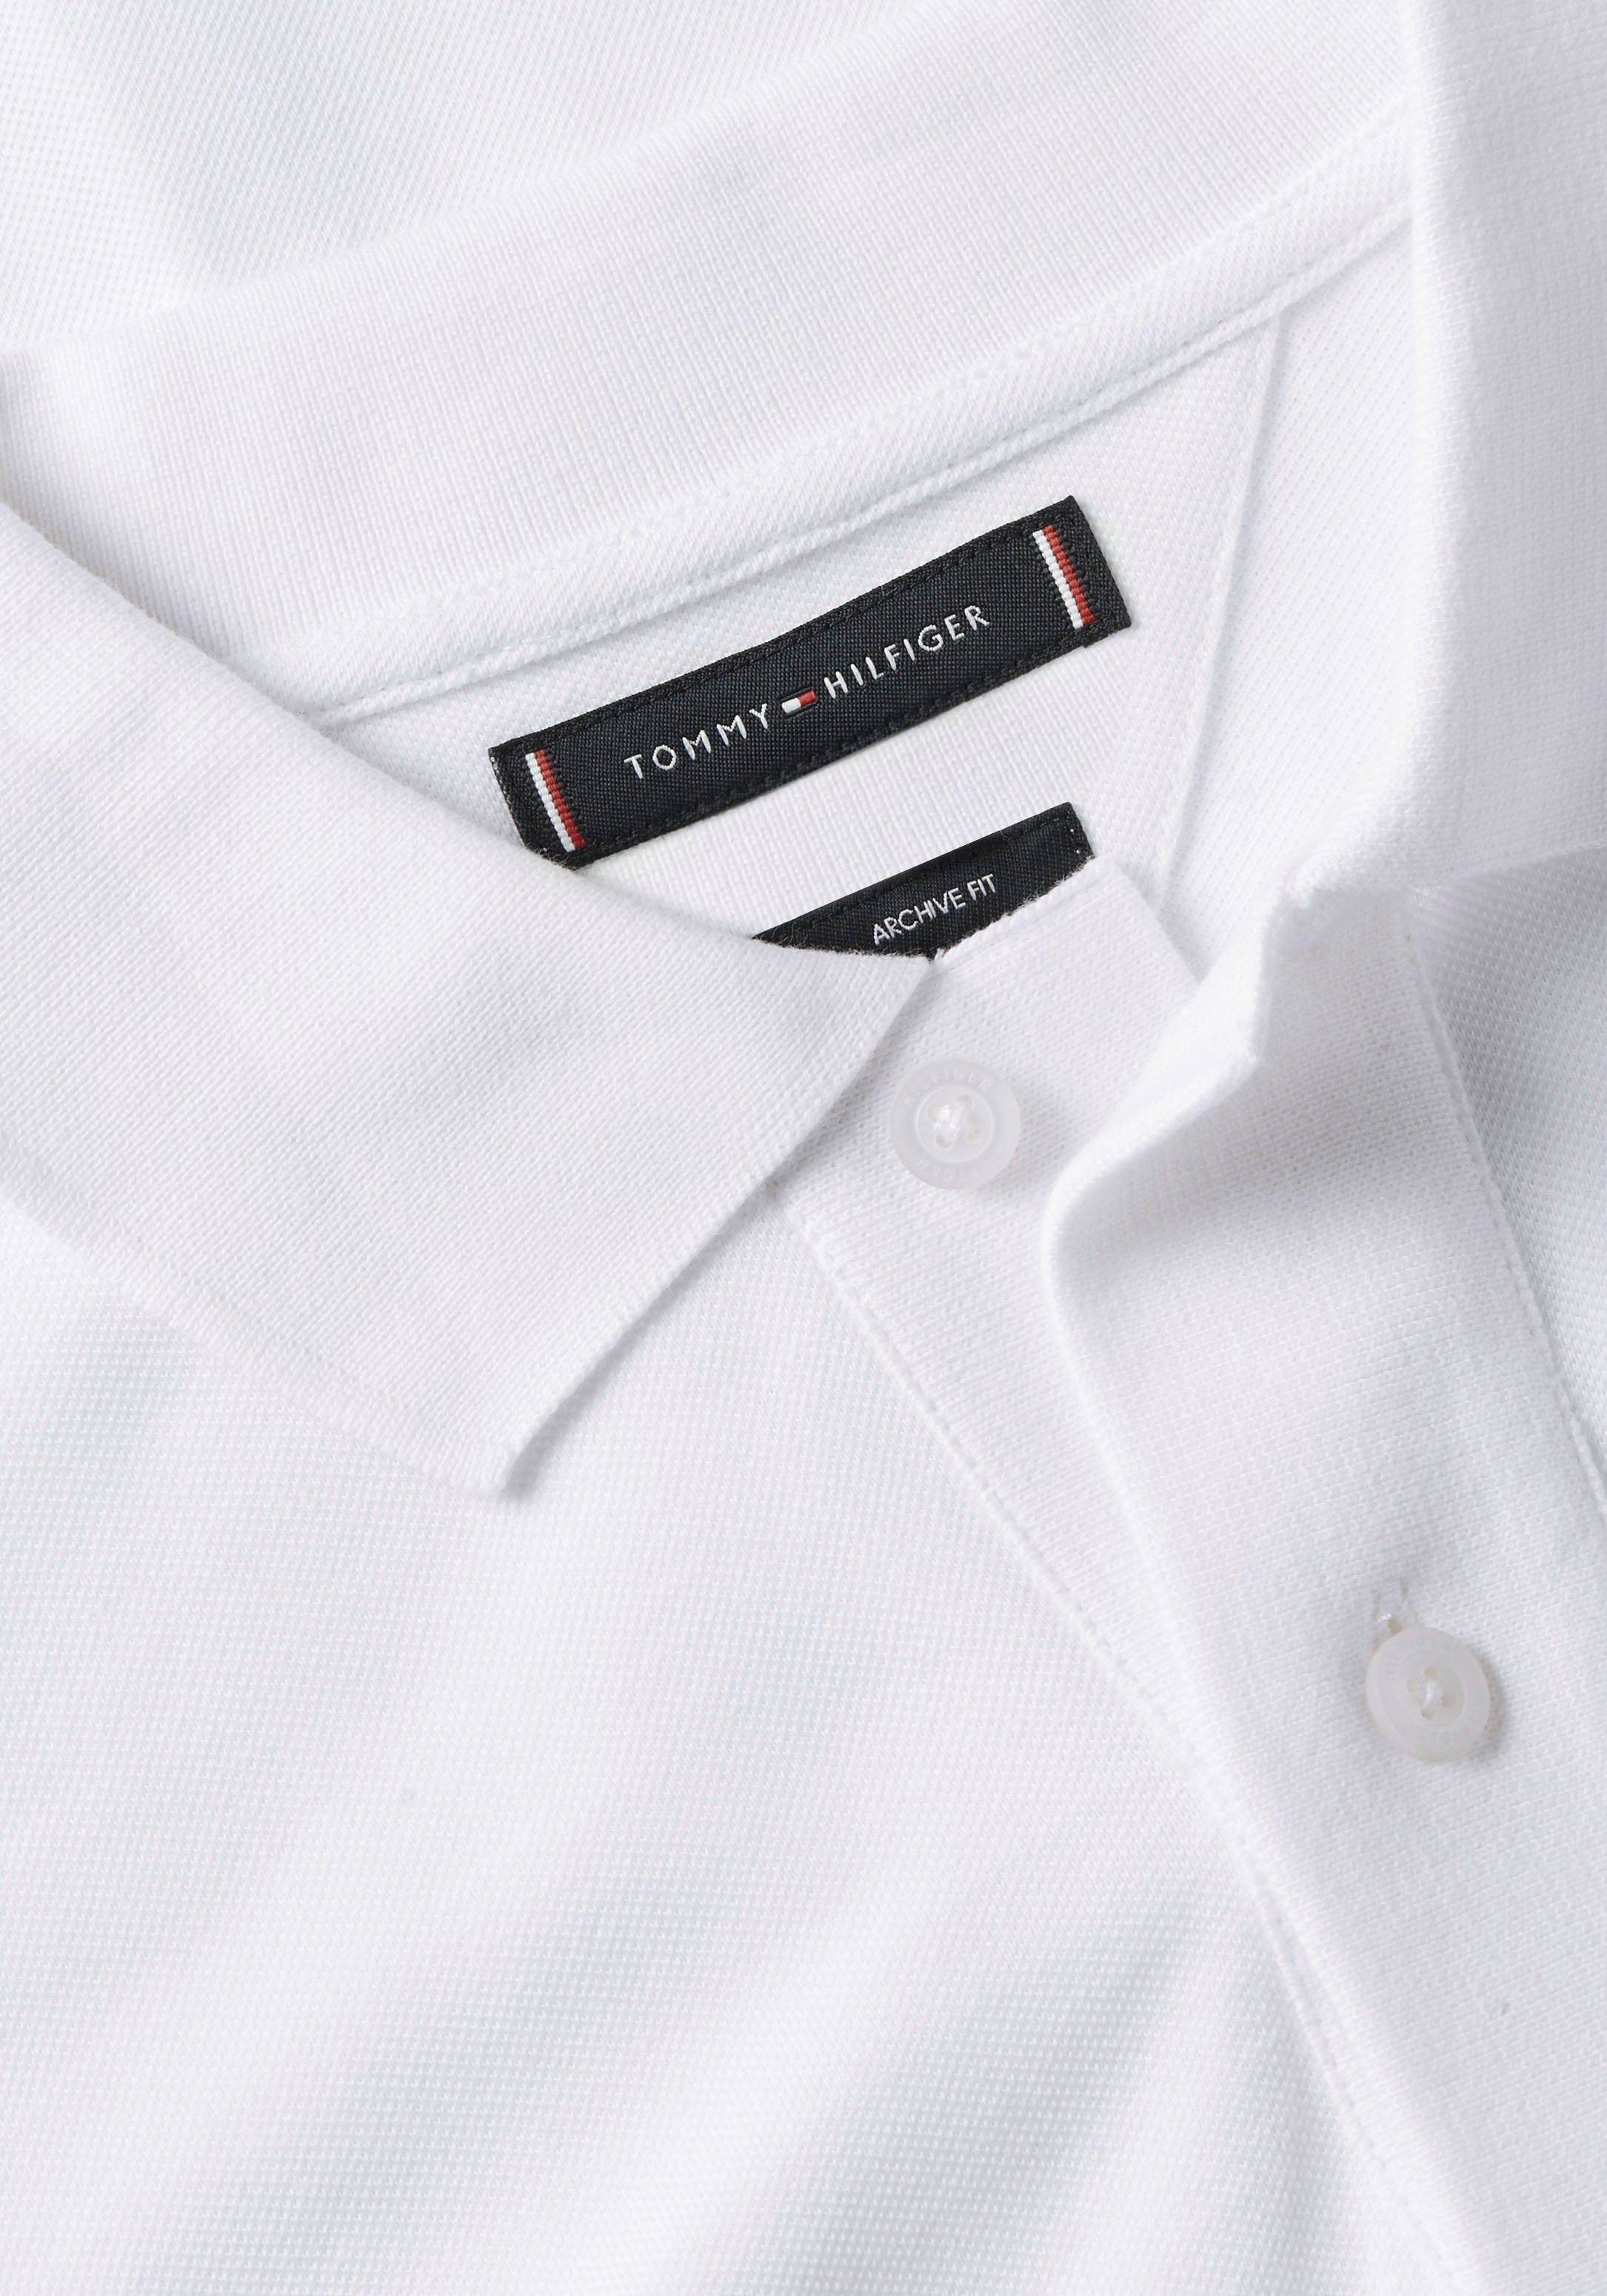 Poloshirt Tommy POLO Hilfiger ARCHIVE MONOTYPE STRUC White